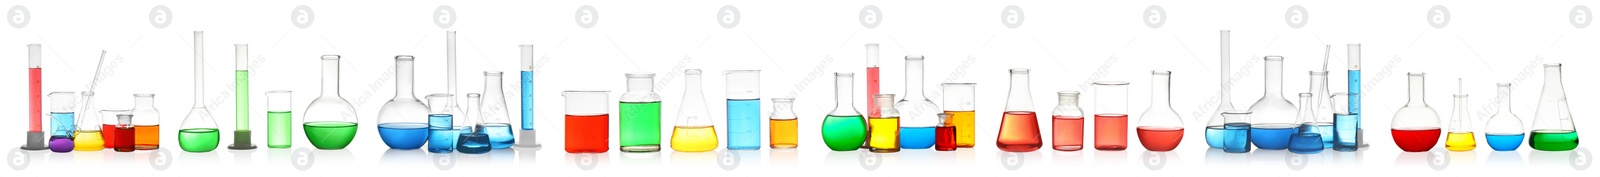 Image of Set of laboratory glassware with colorful liquids on white background. Banner design